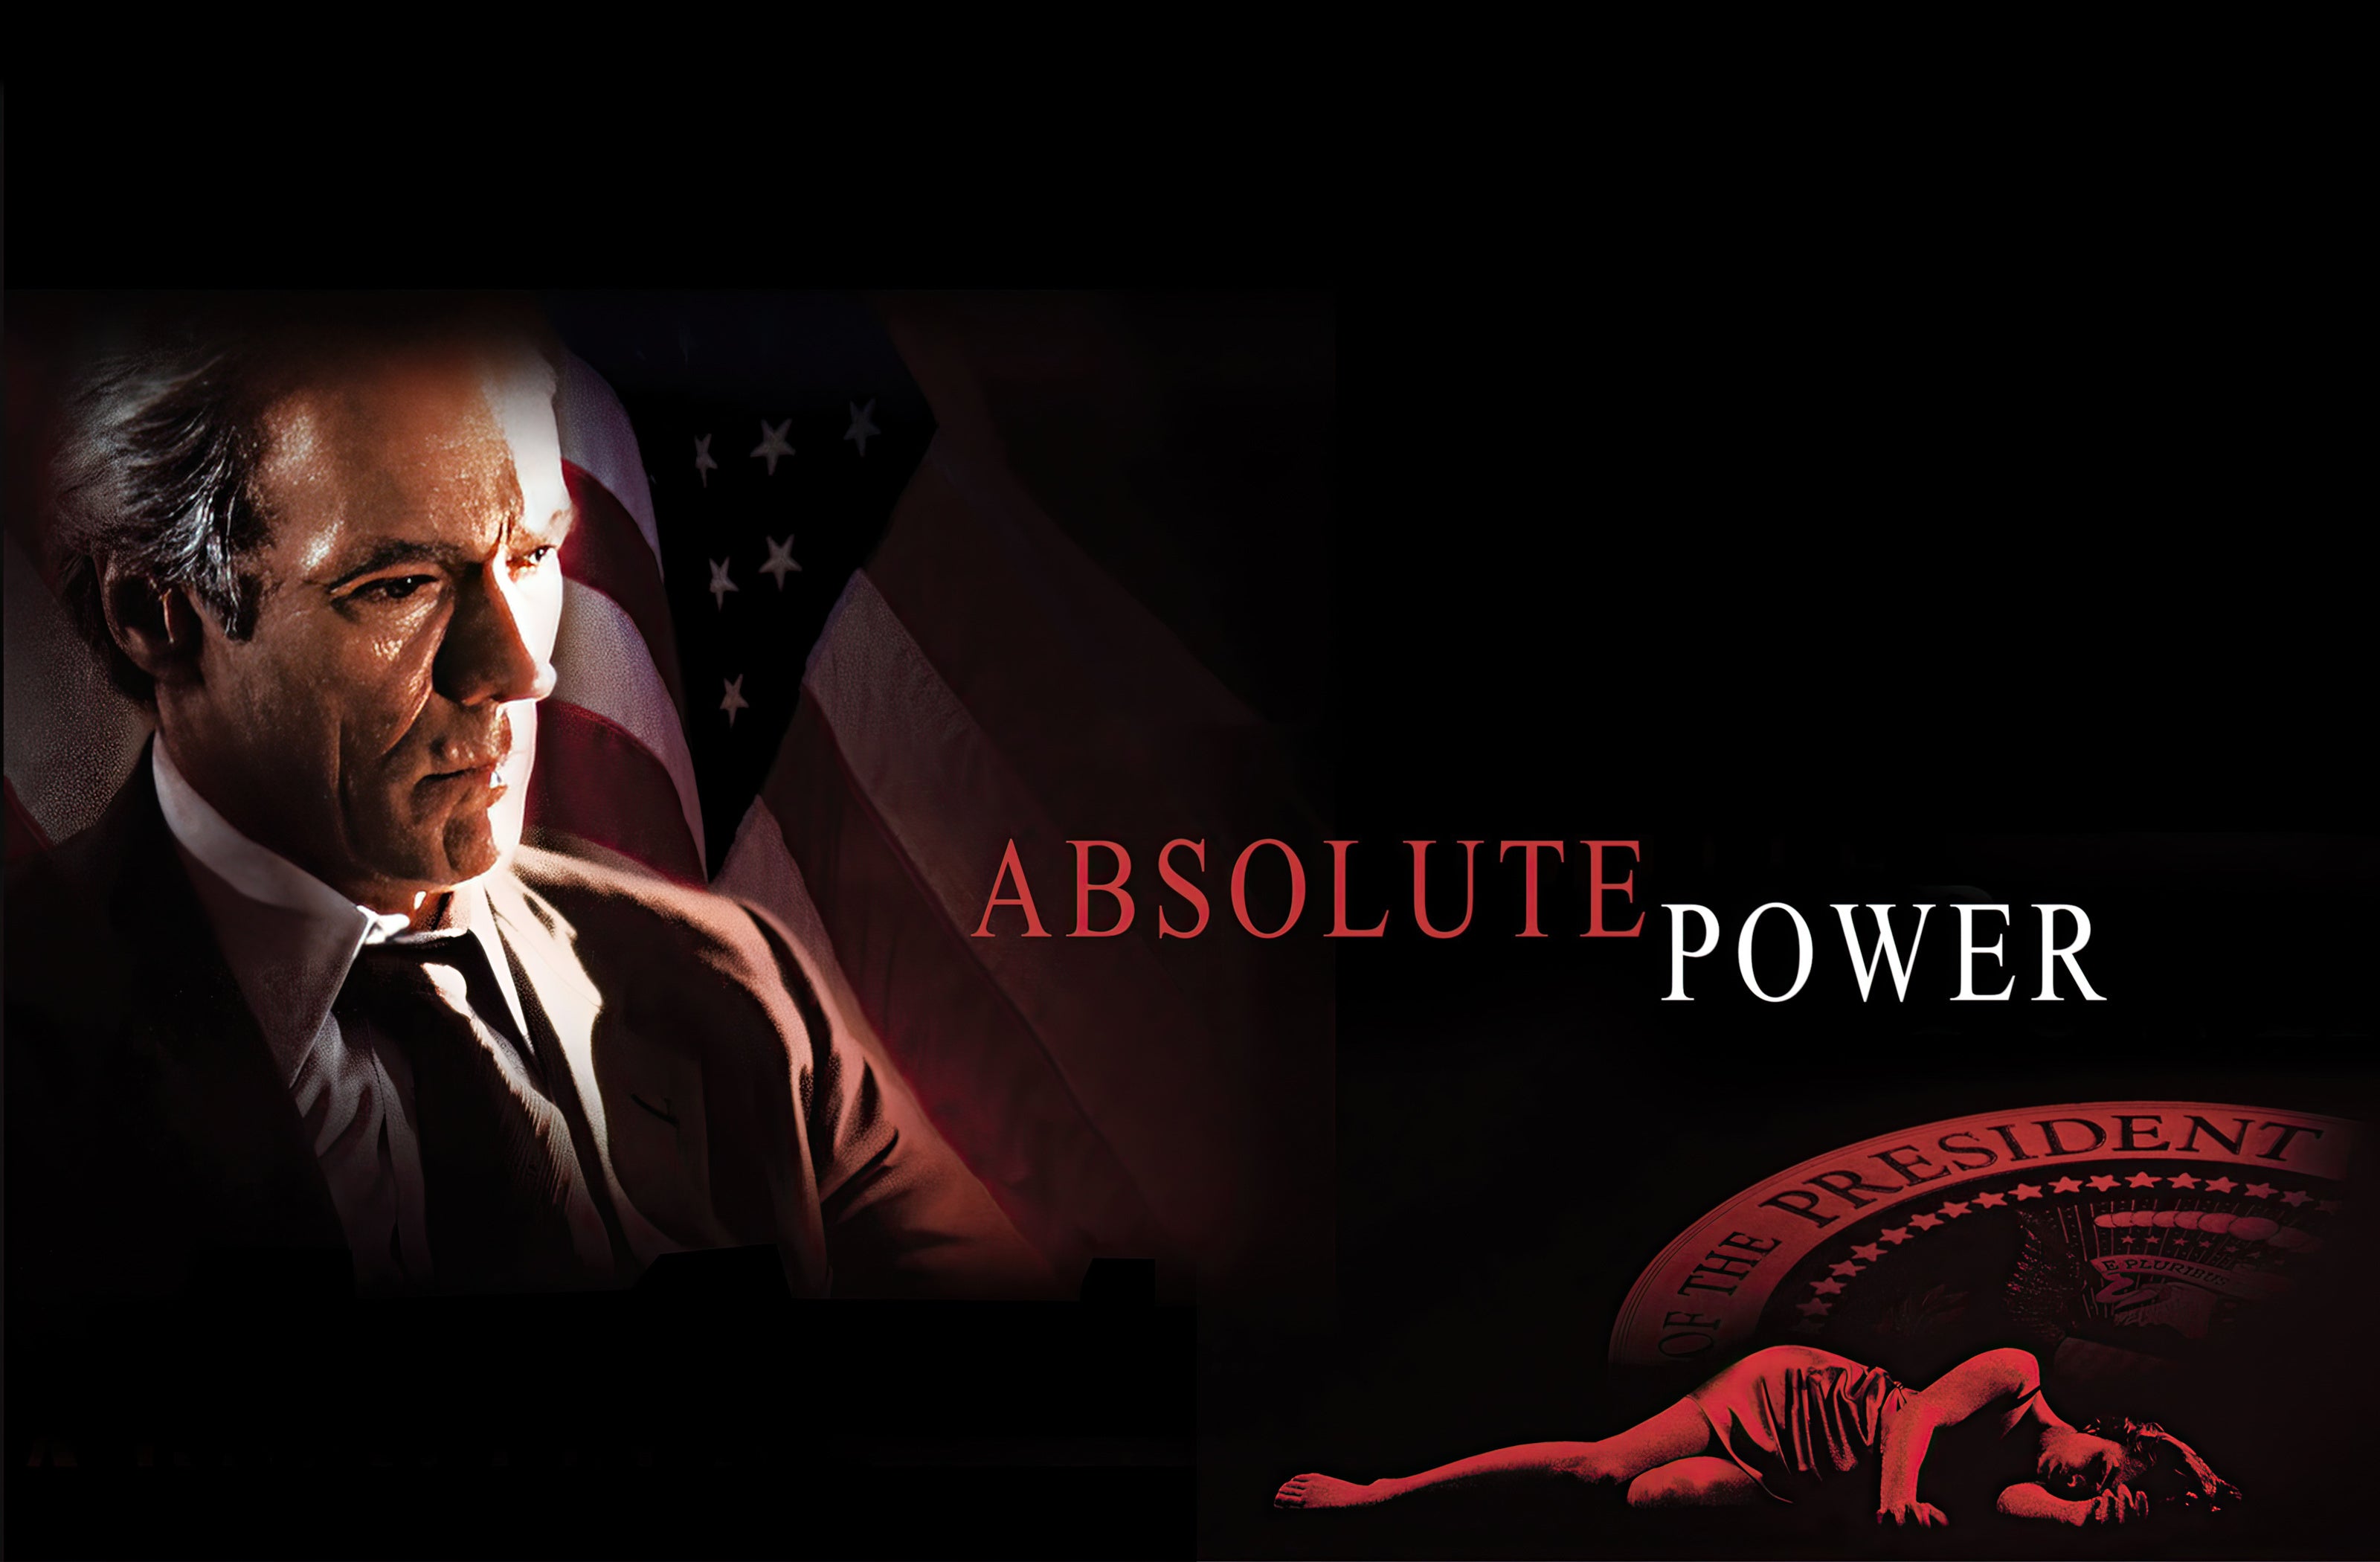 Absolute Power Script Screenplay - Image of Movie Poster